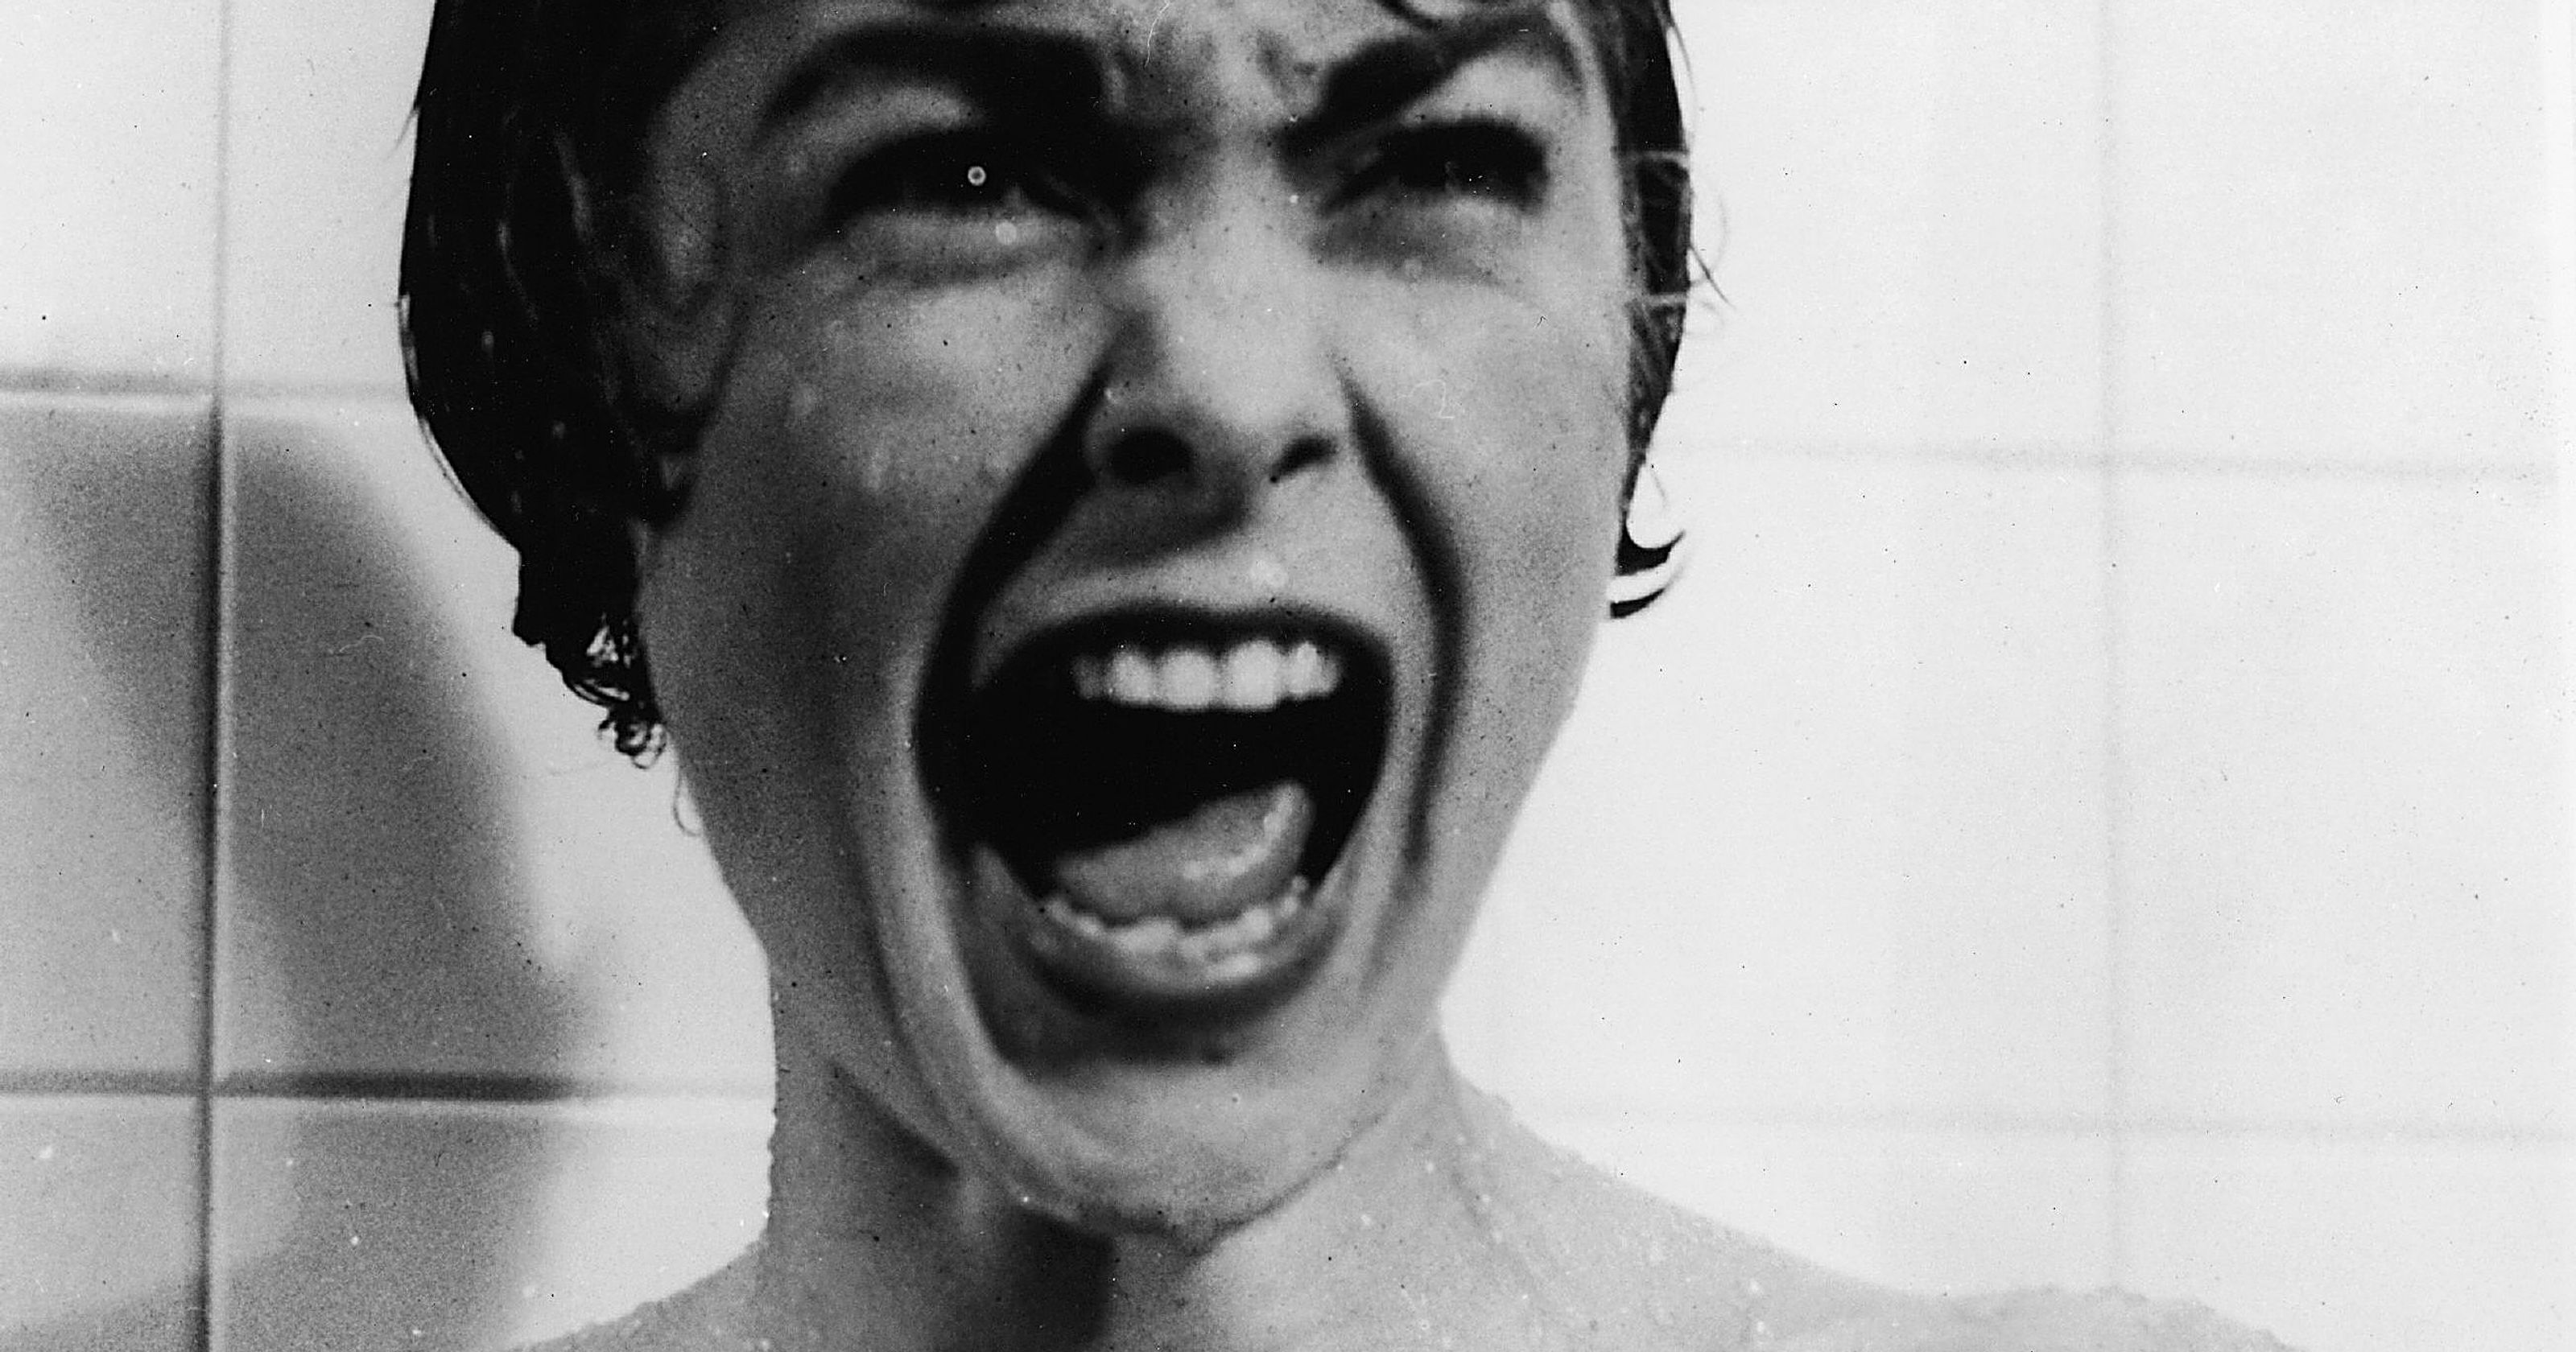 If You Get 16/25 on This Random Knowledge Quiz, You Know Something About Every Subject Psycho movie